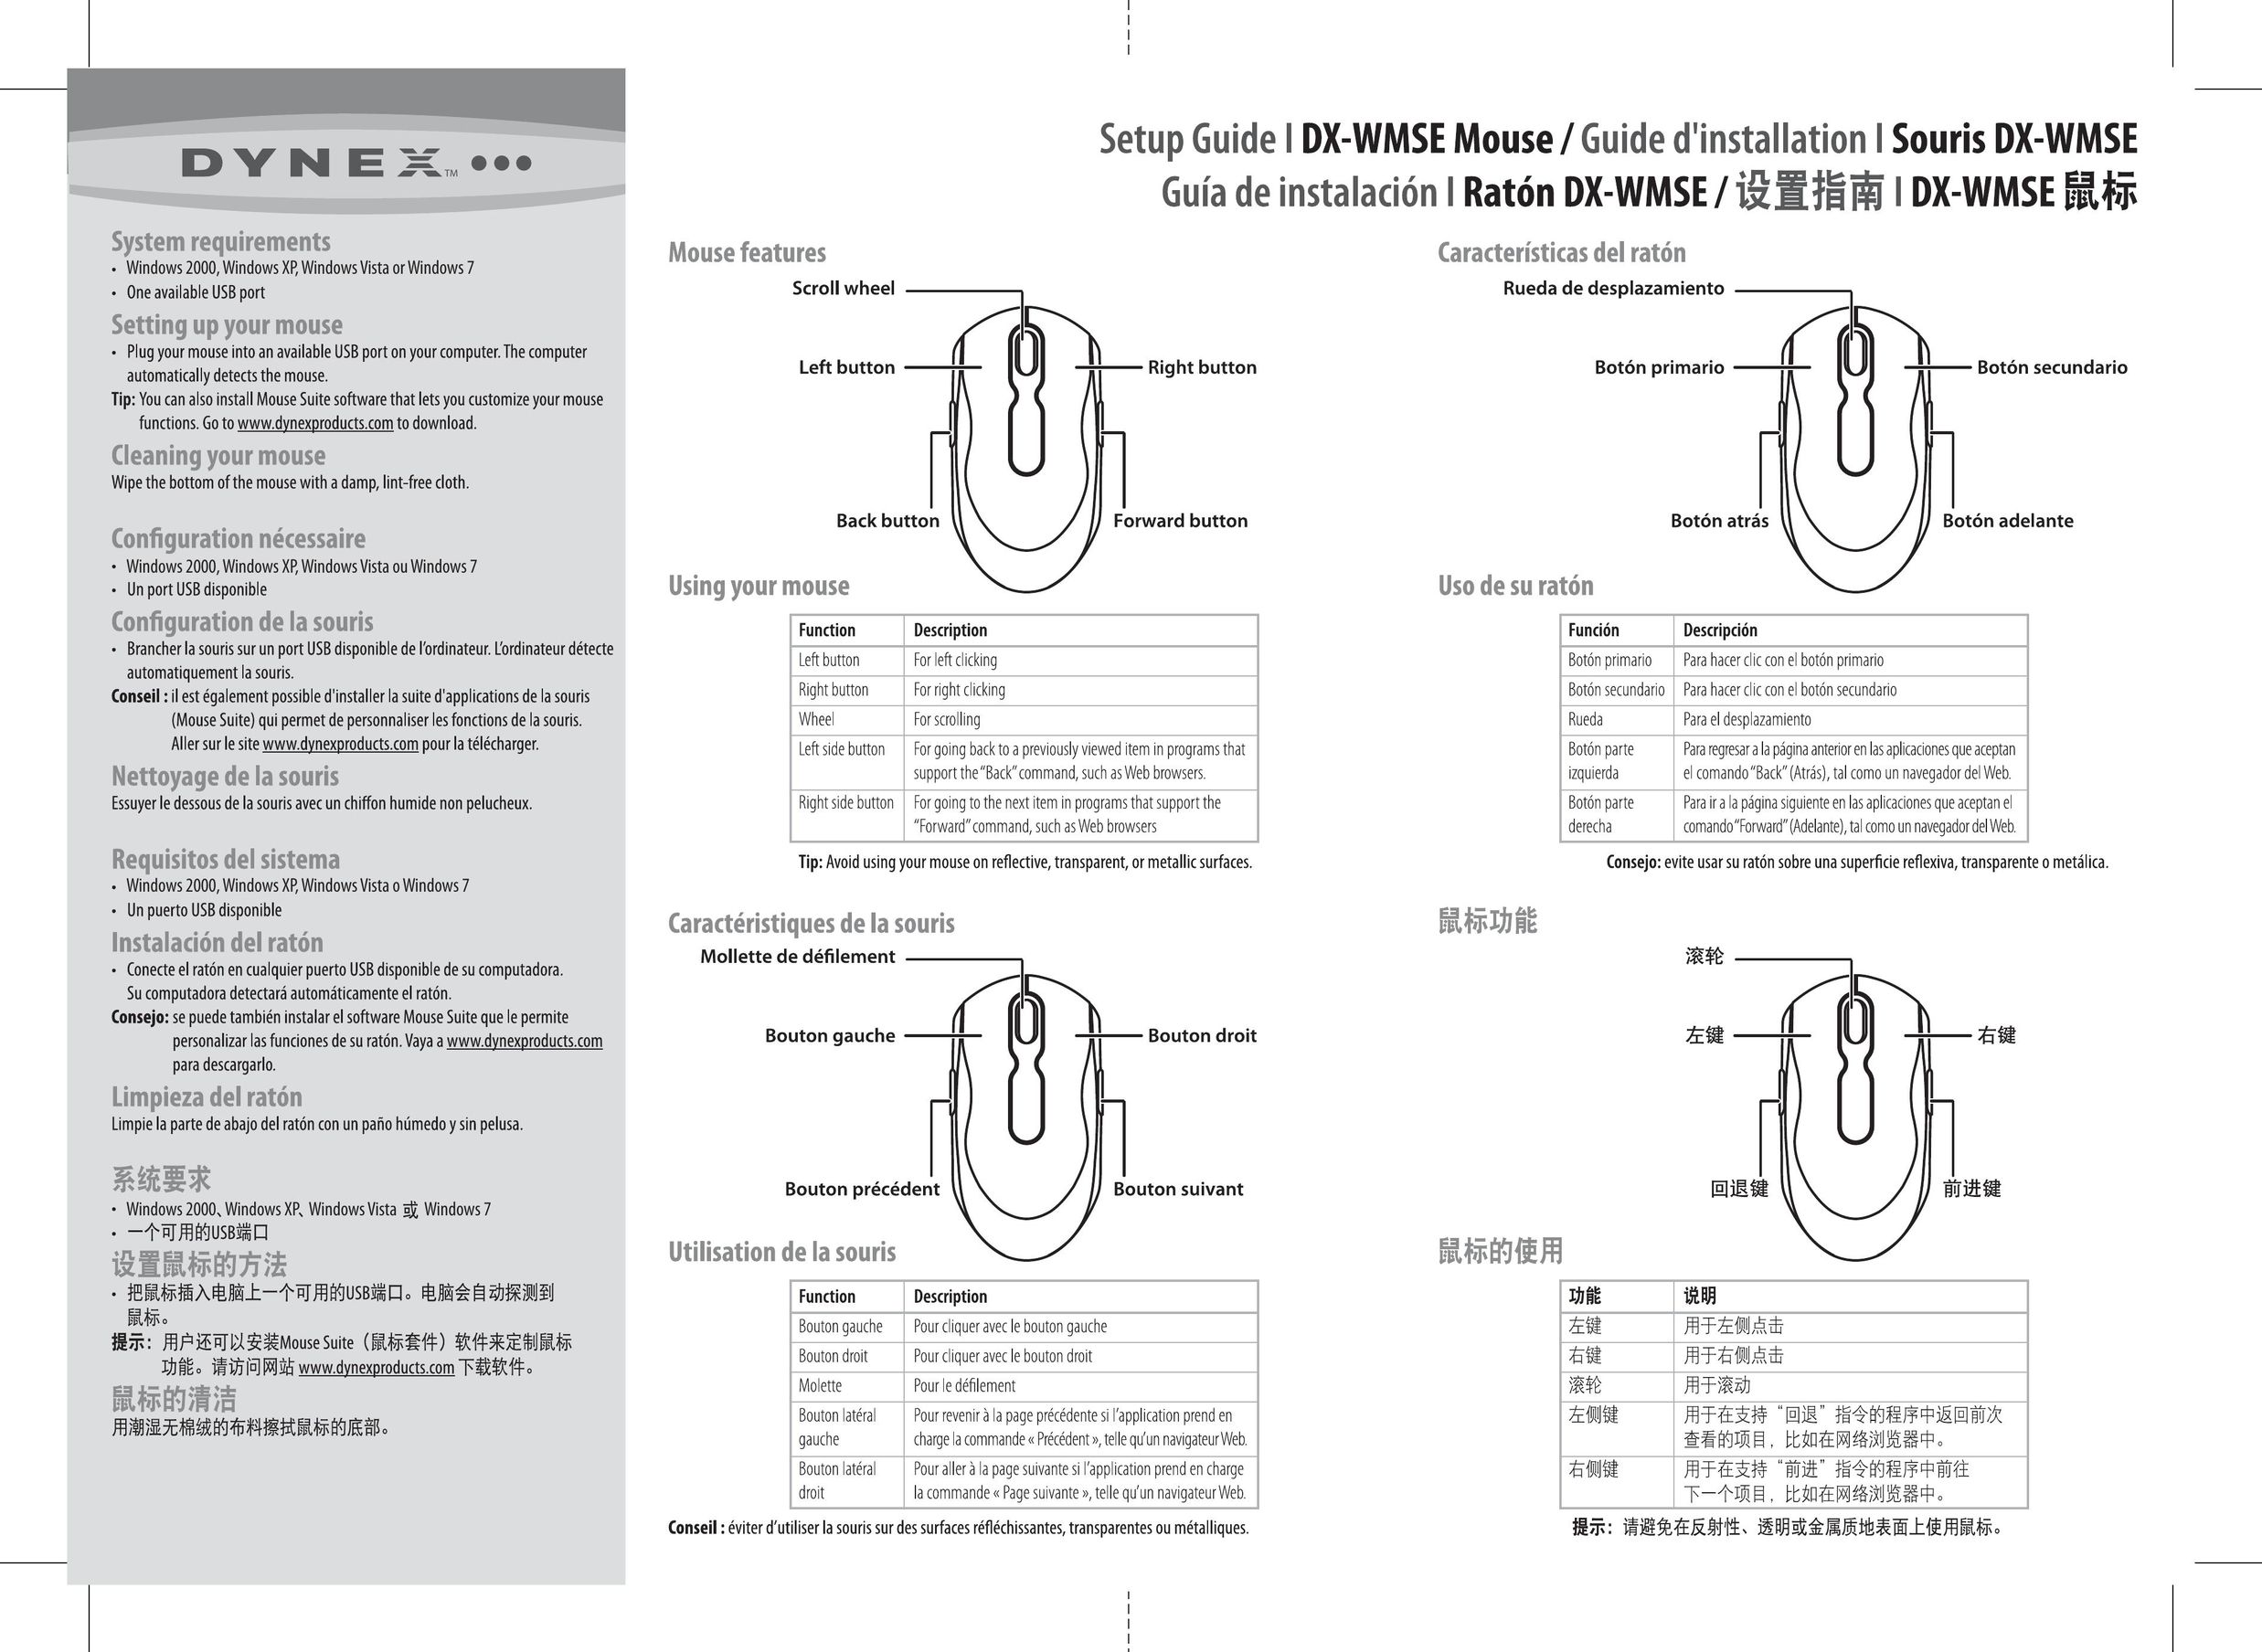 Dynex DX-WMSE Mouse User Manual (Page 1)